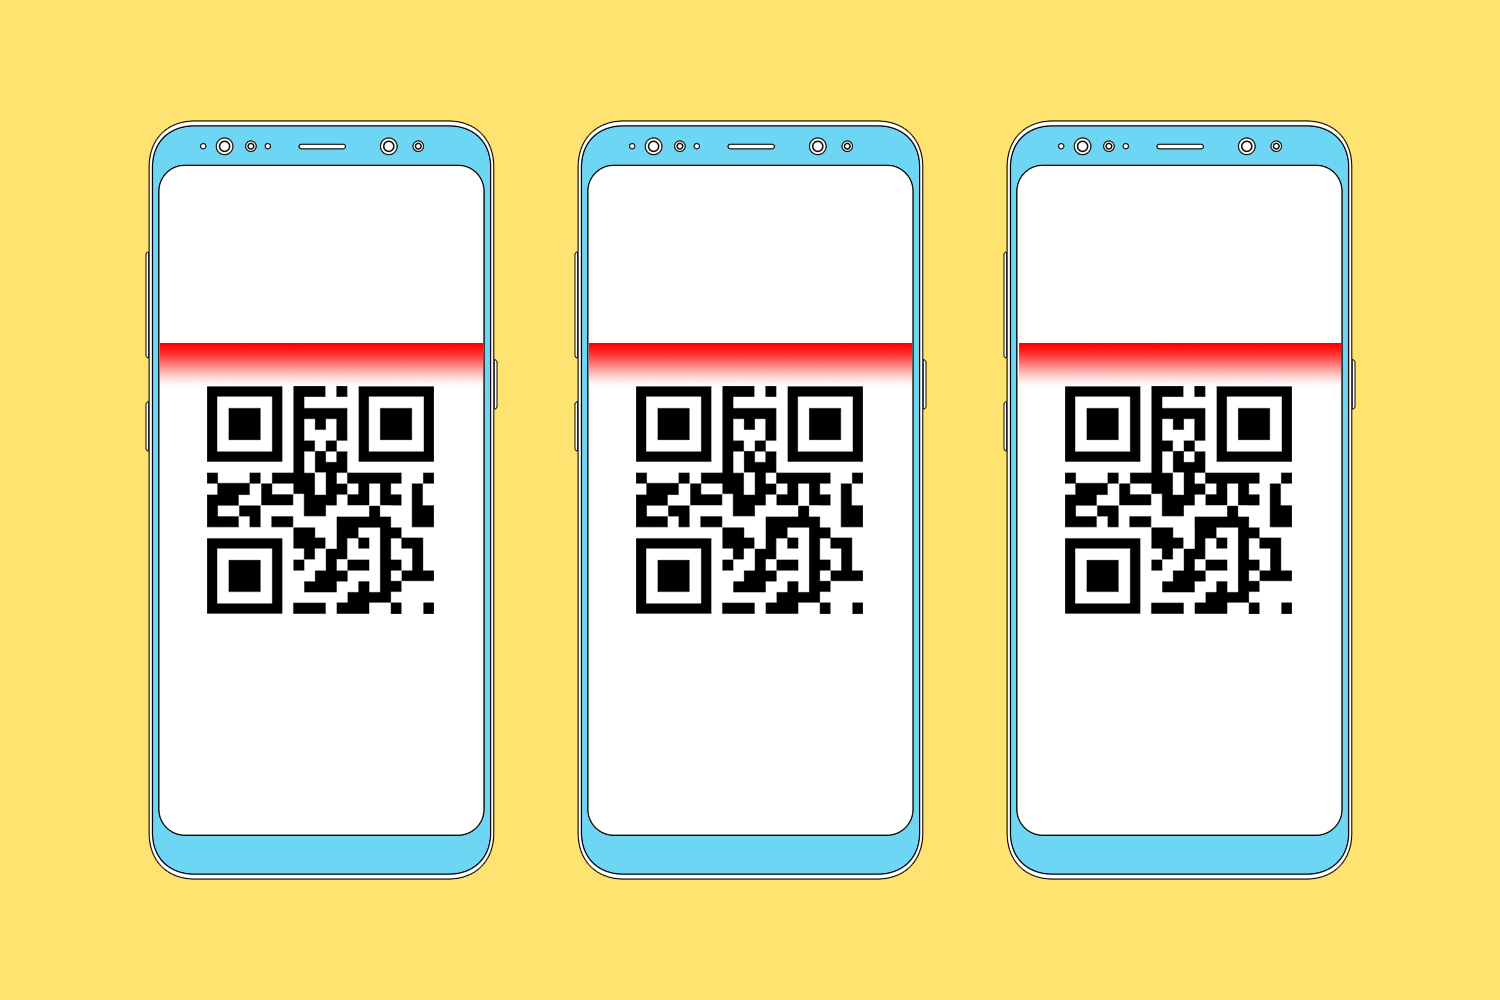 How to Scan QR Codes on Your Phone